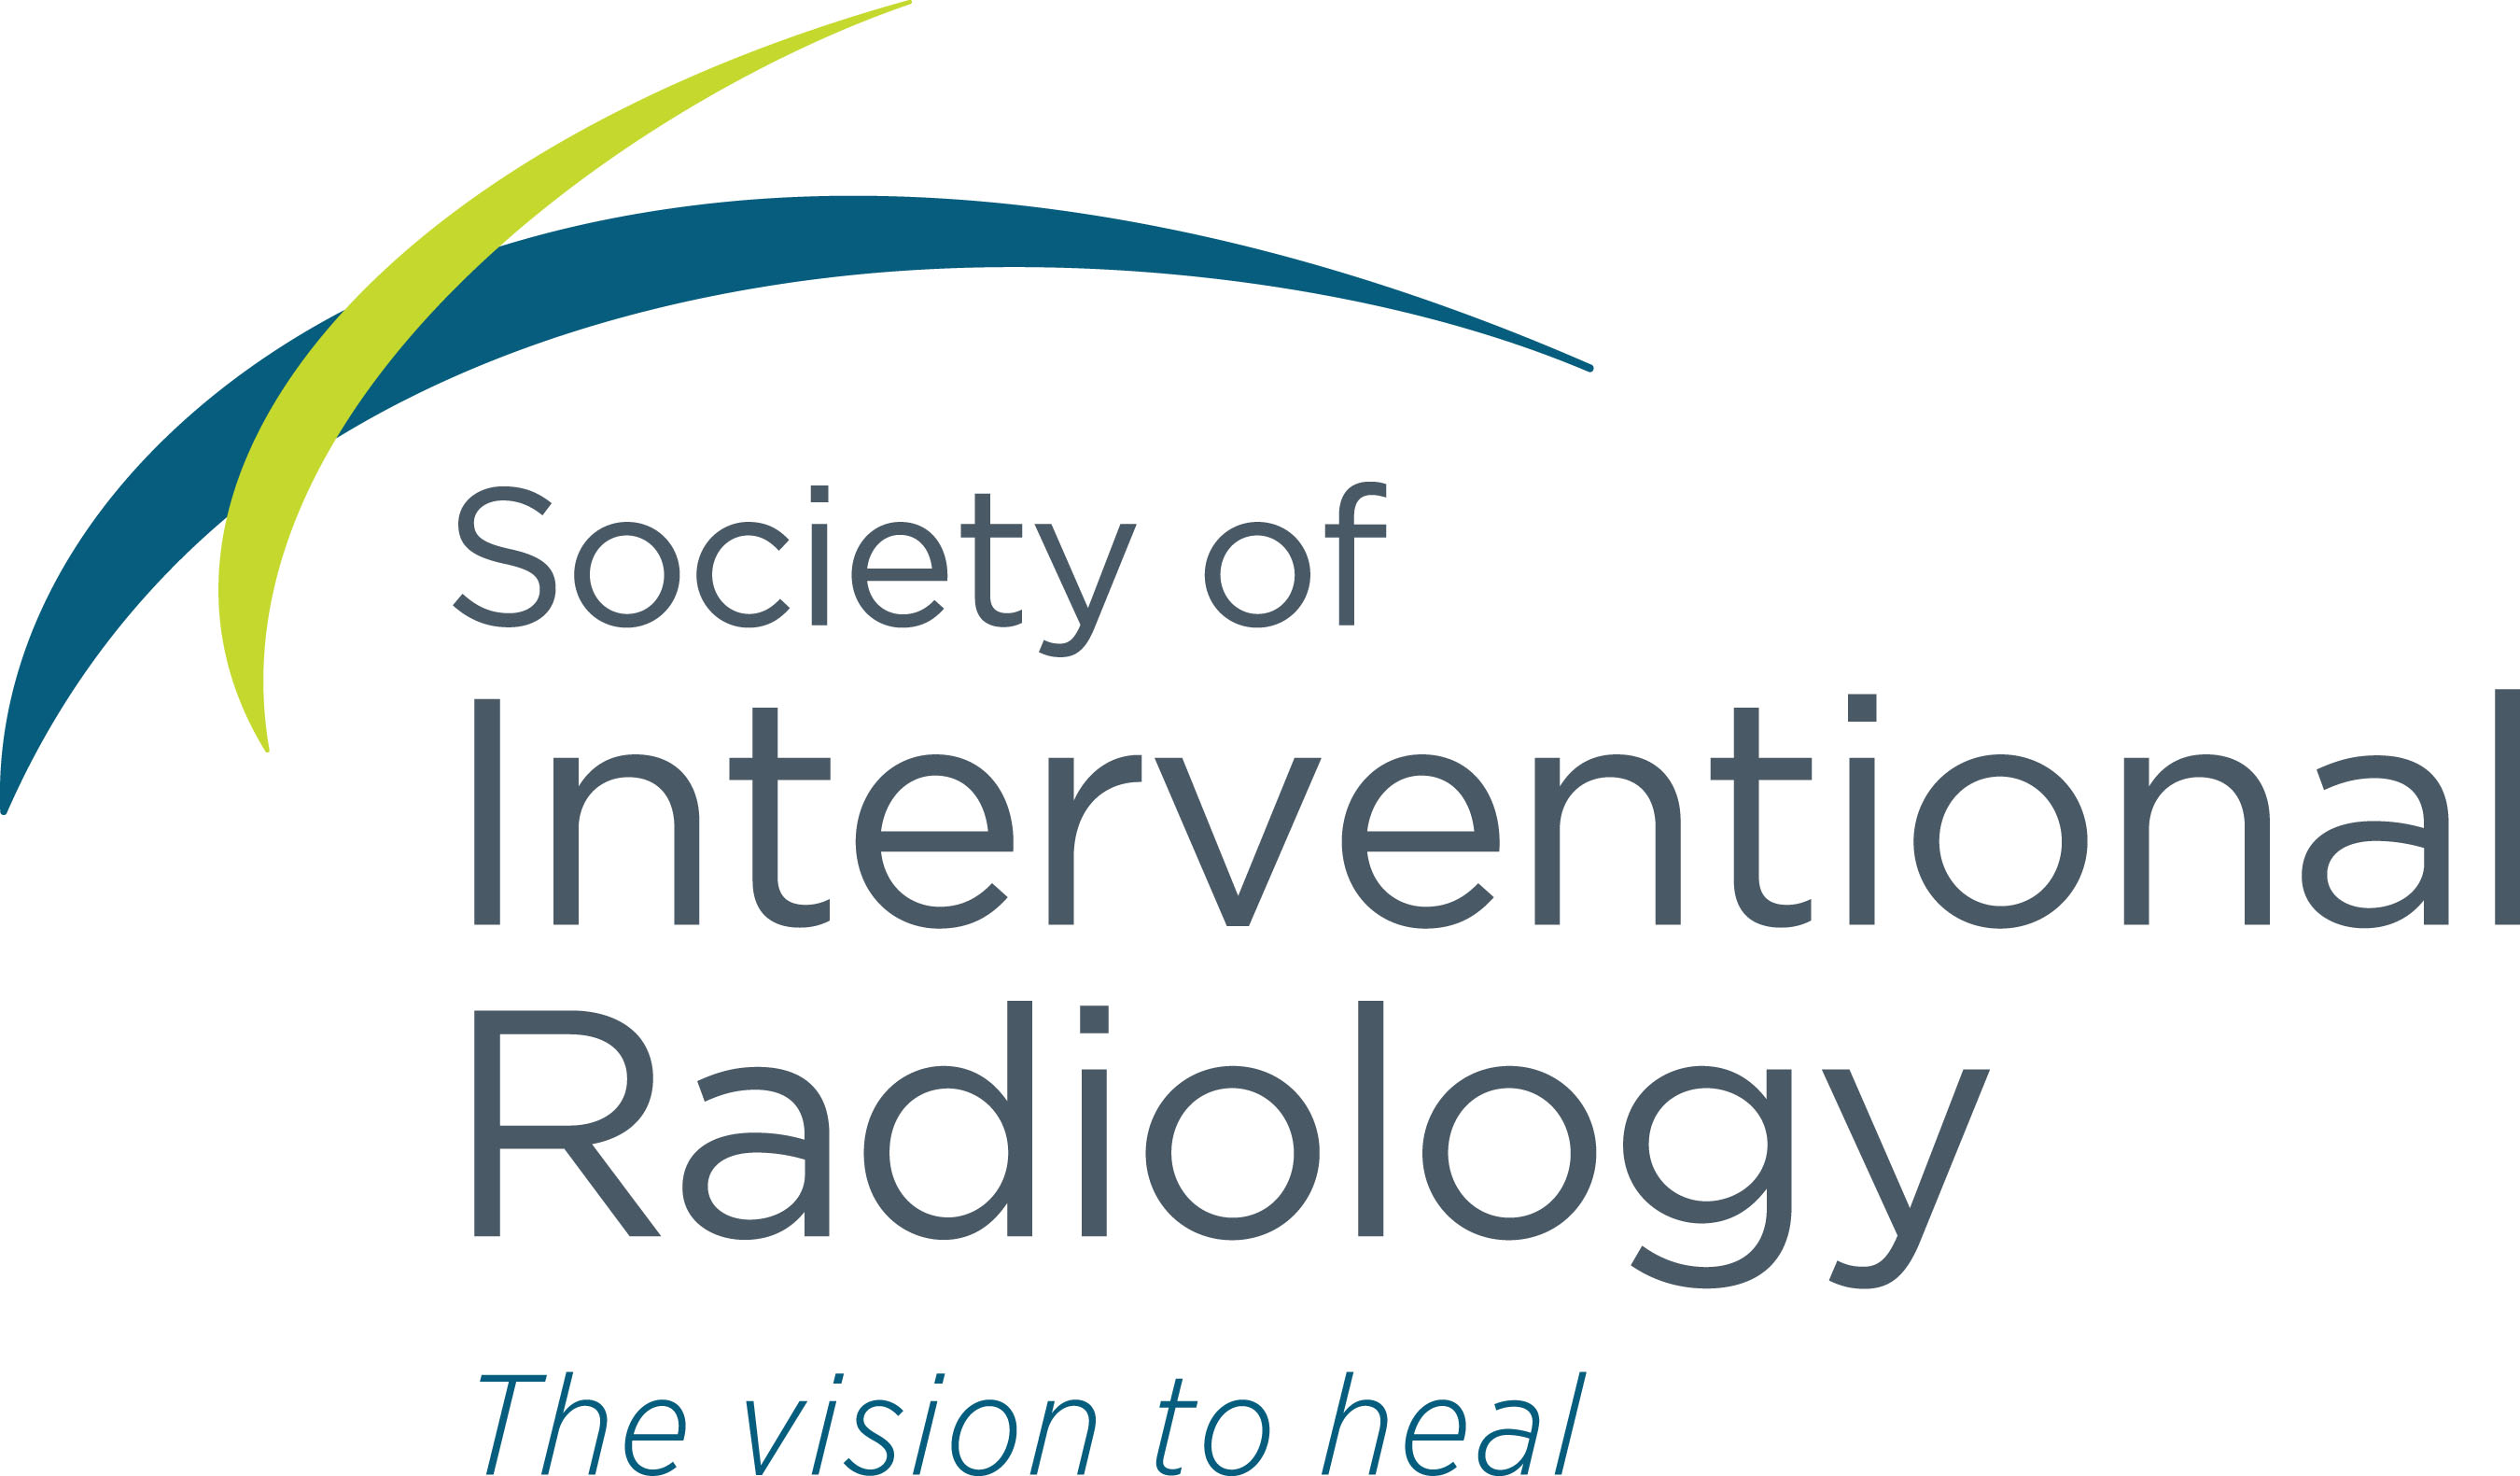 SIR 2019 - The Society of Interventional Radiology 2019 Meeting